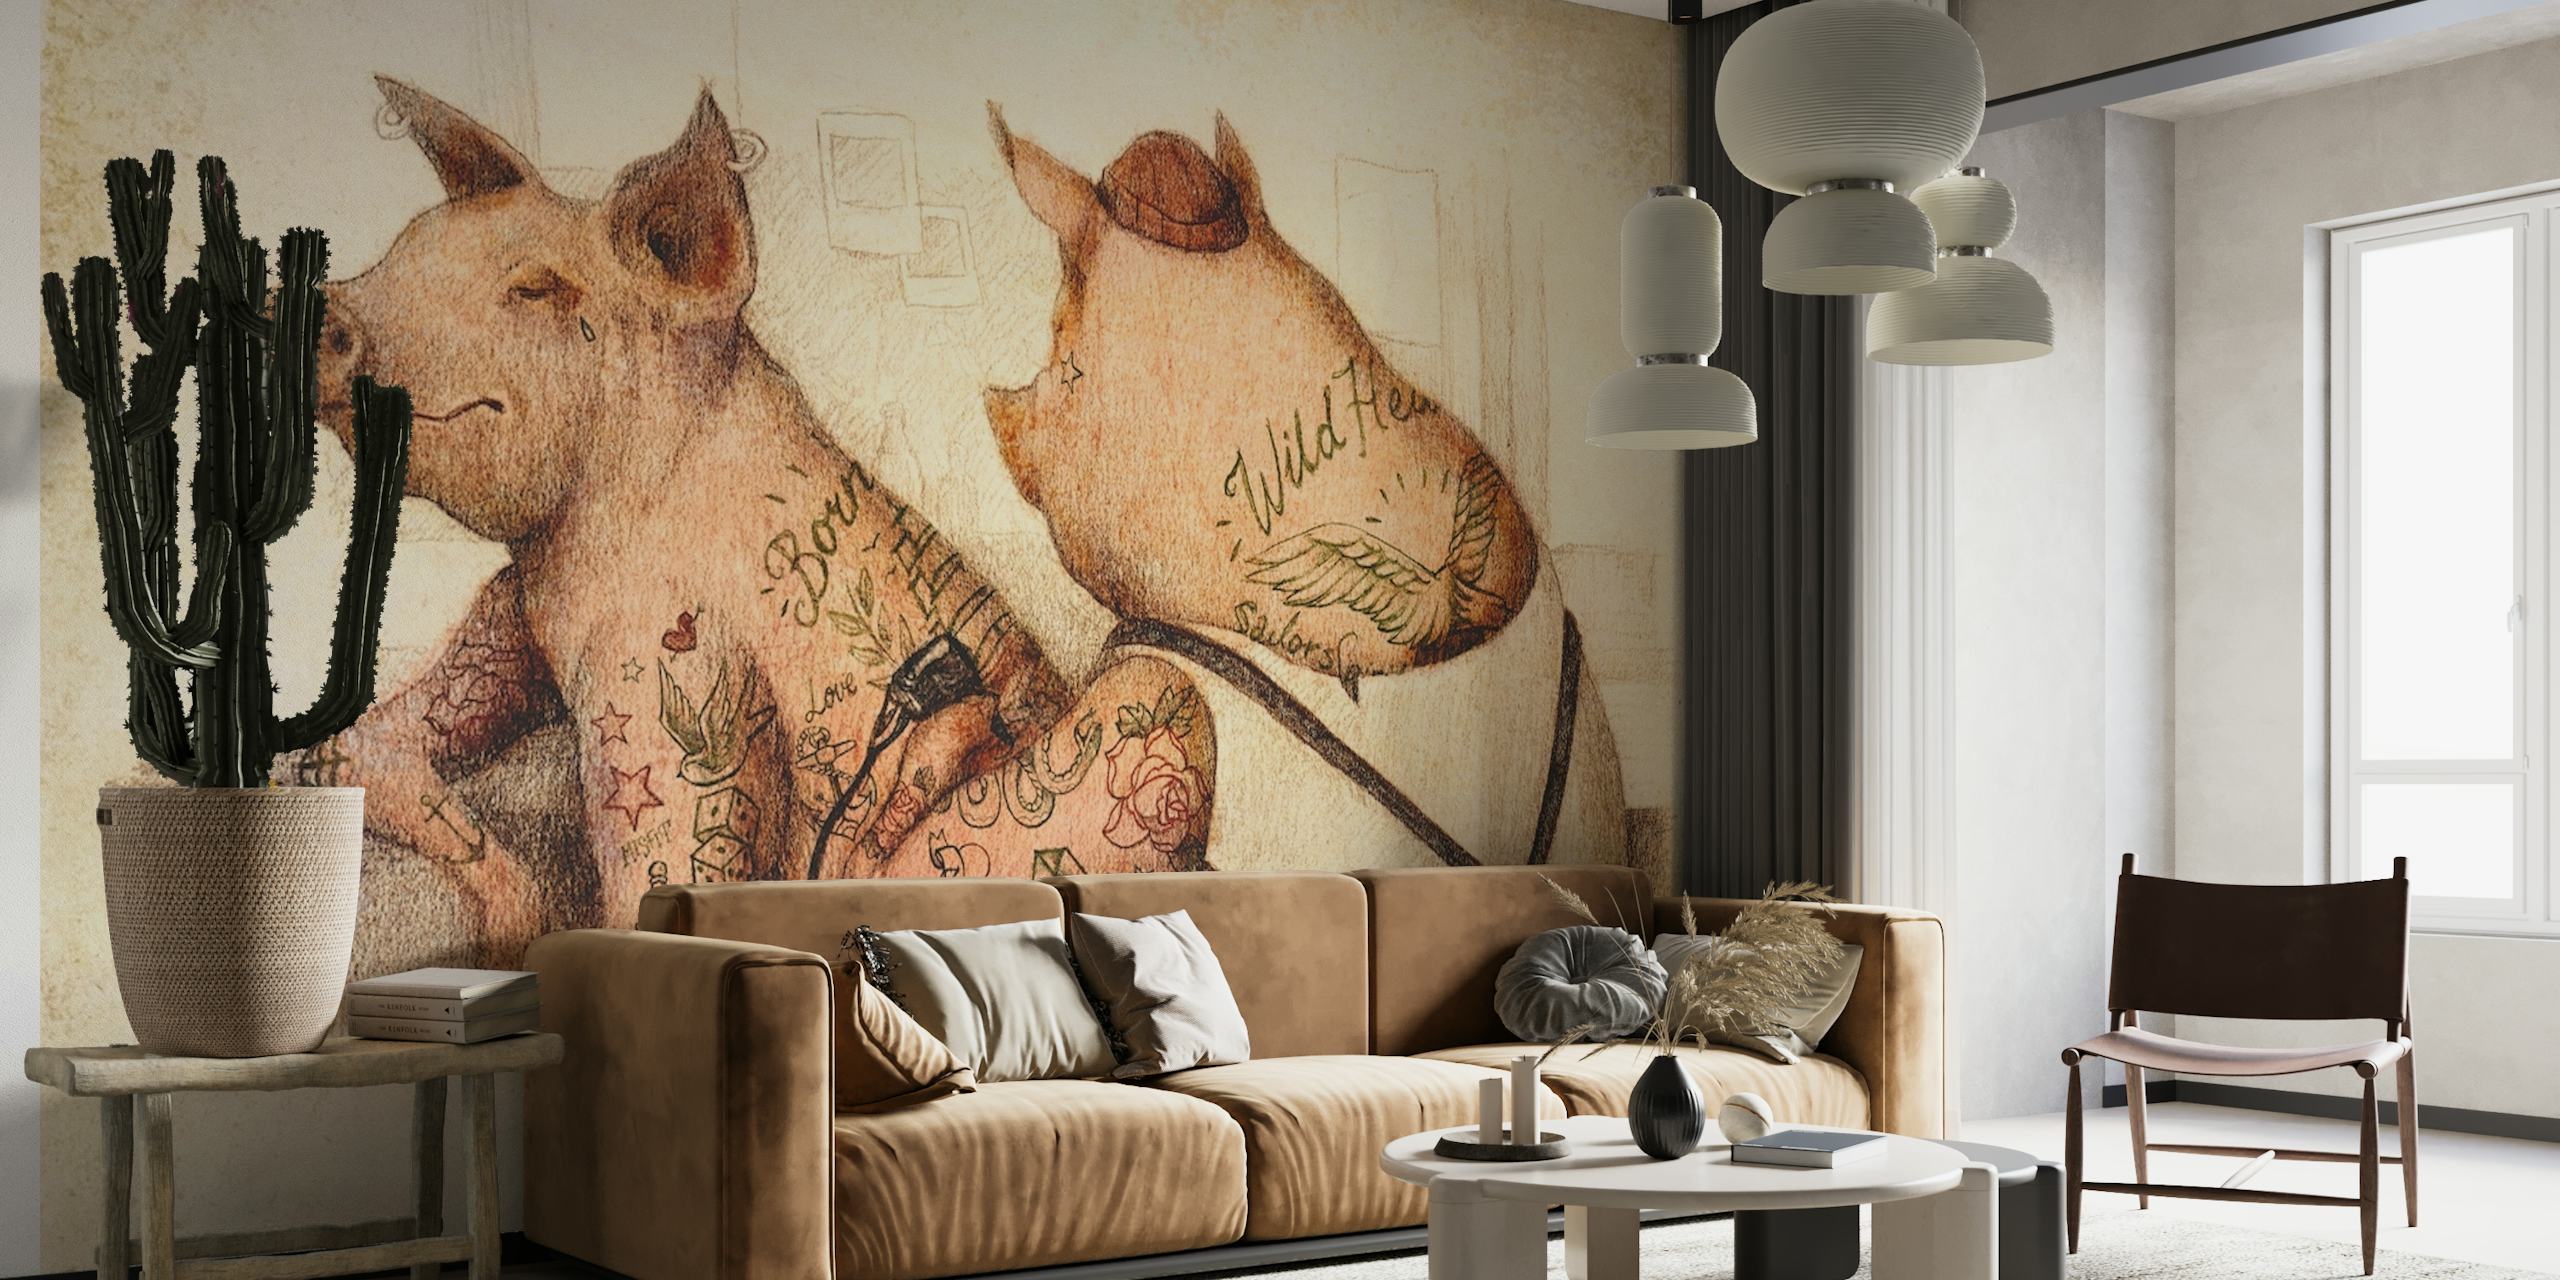 Whimsical wall mural featuring two tattooed pigs with intricate ink designs on a vintage-style background.